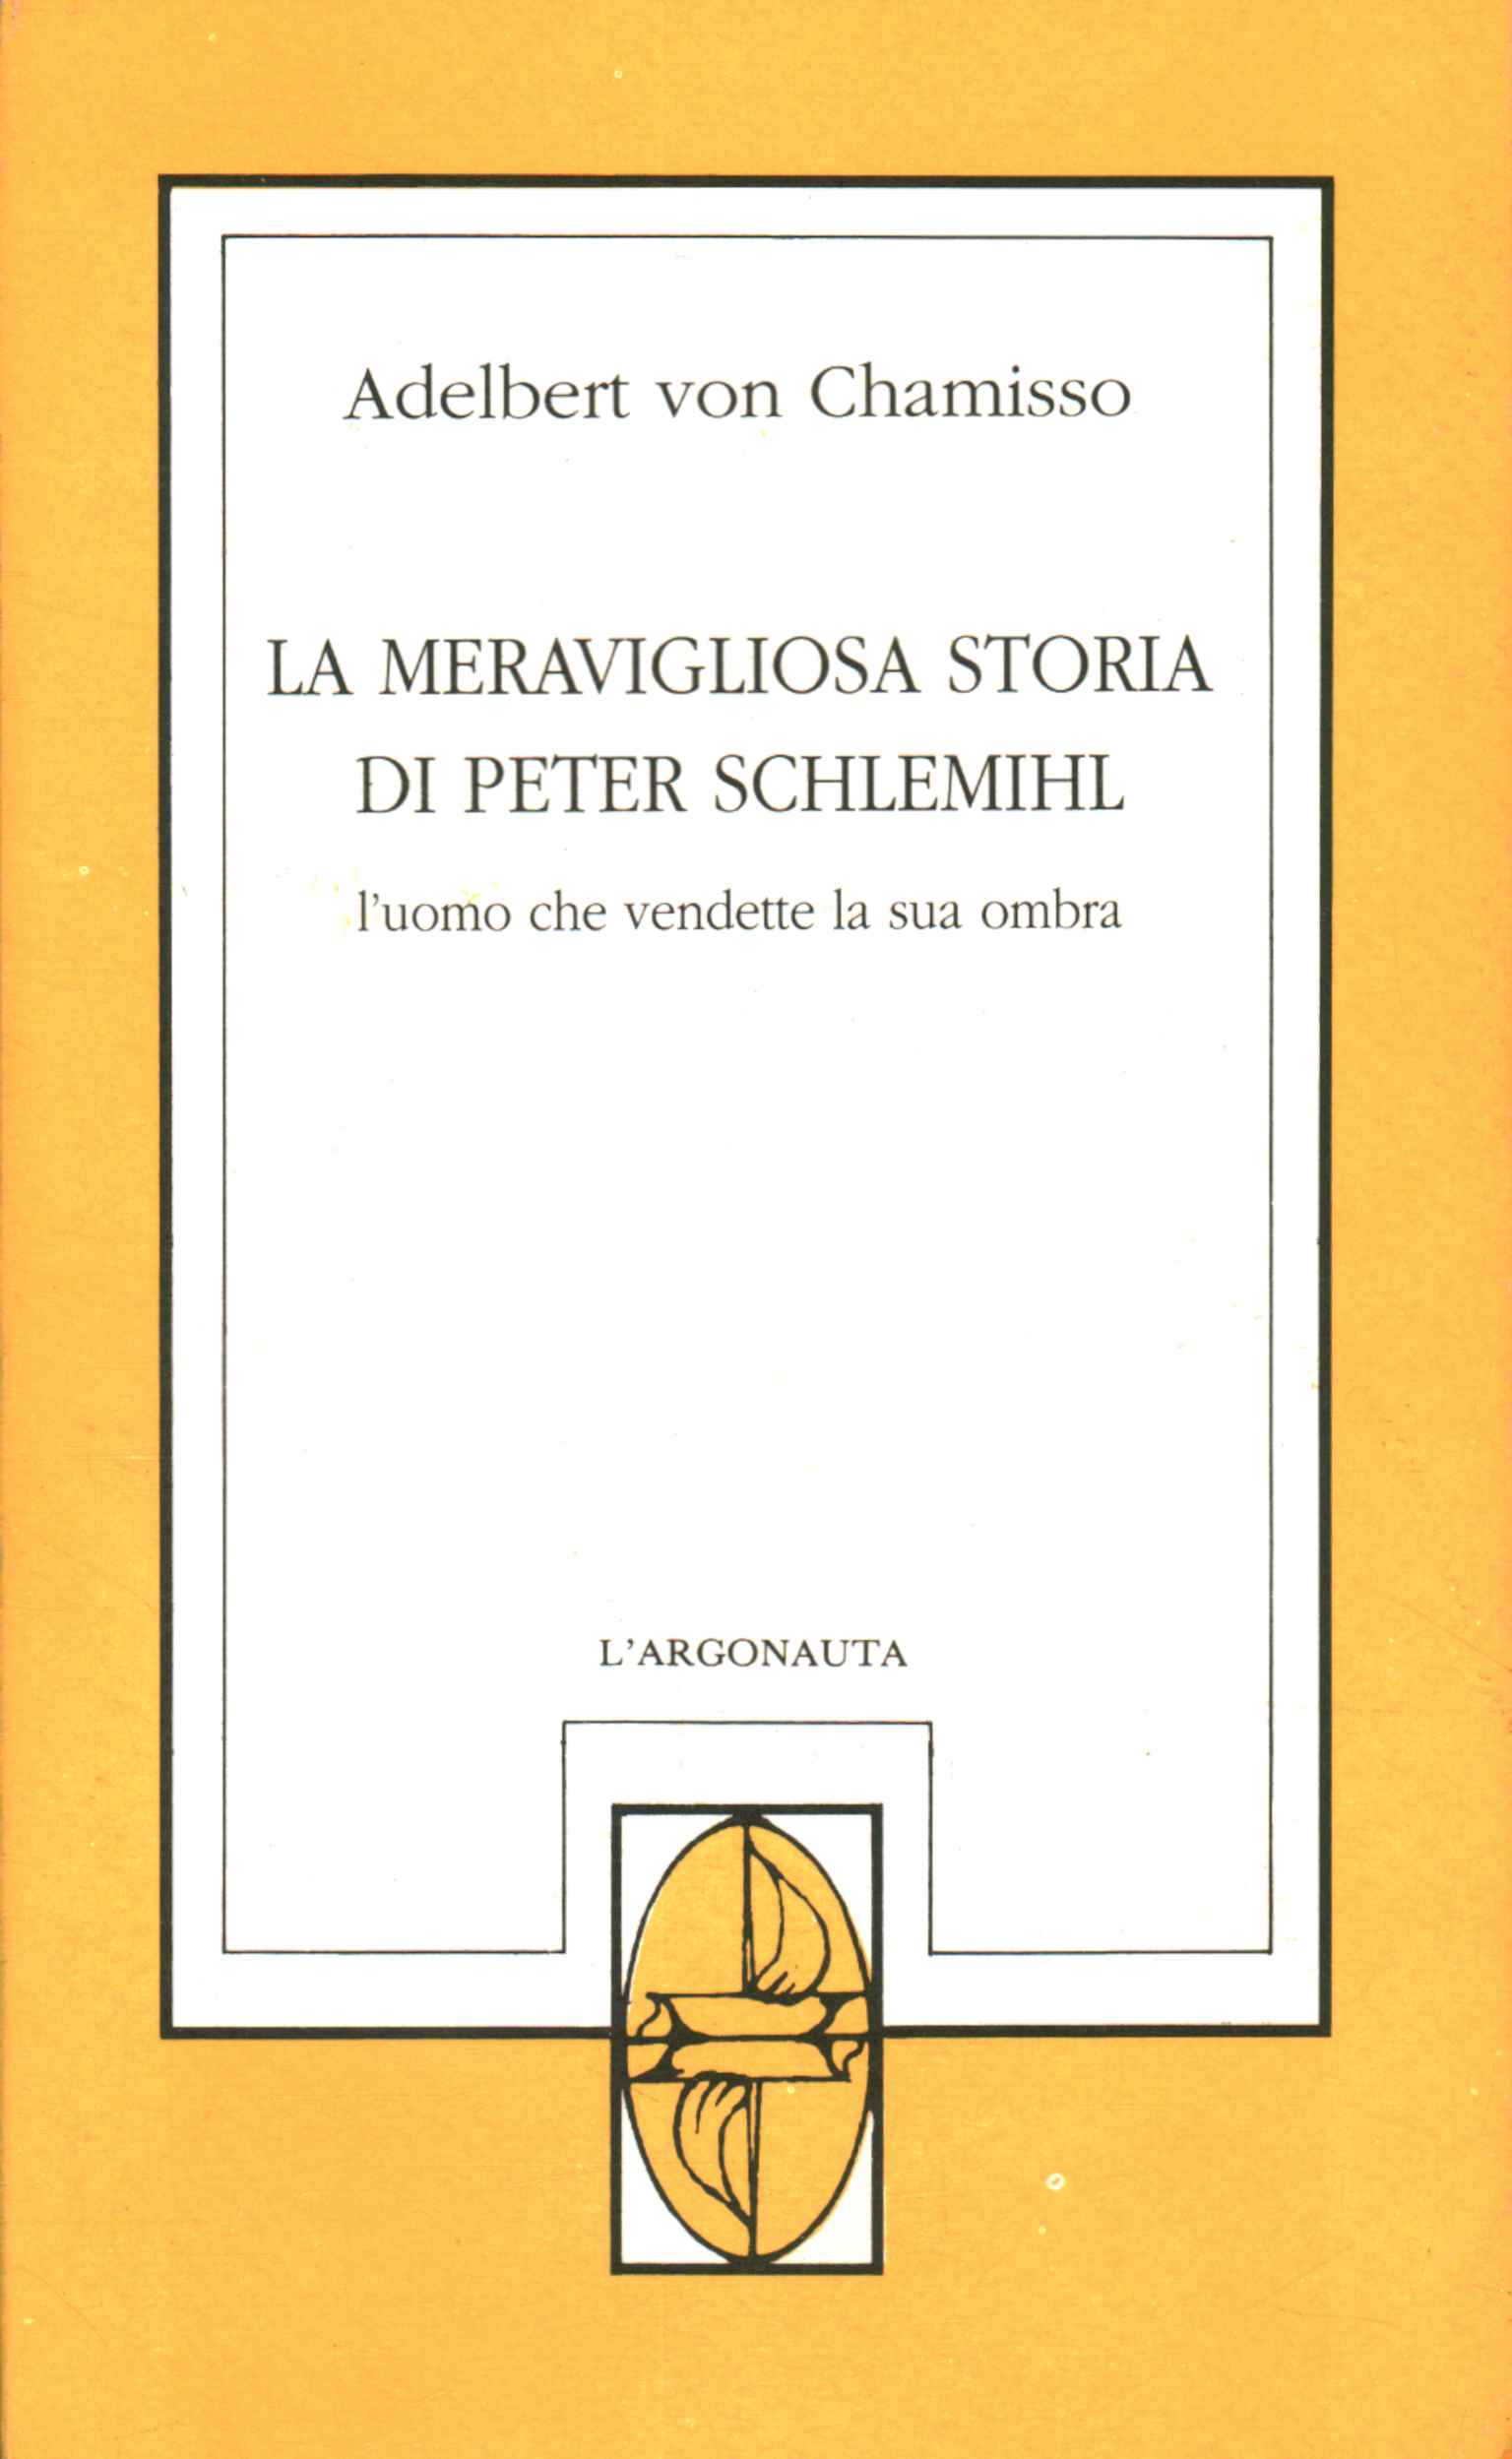 The wonderful story of Peter Schlemih